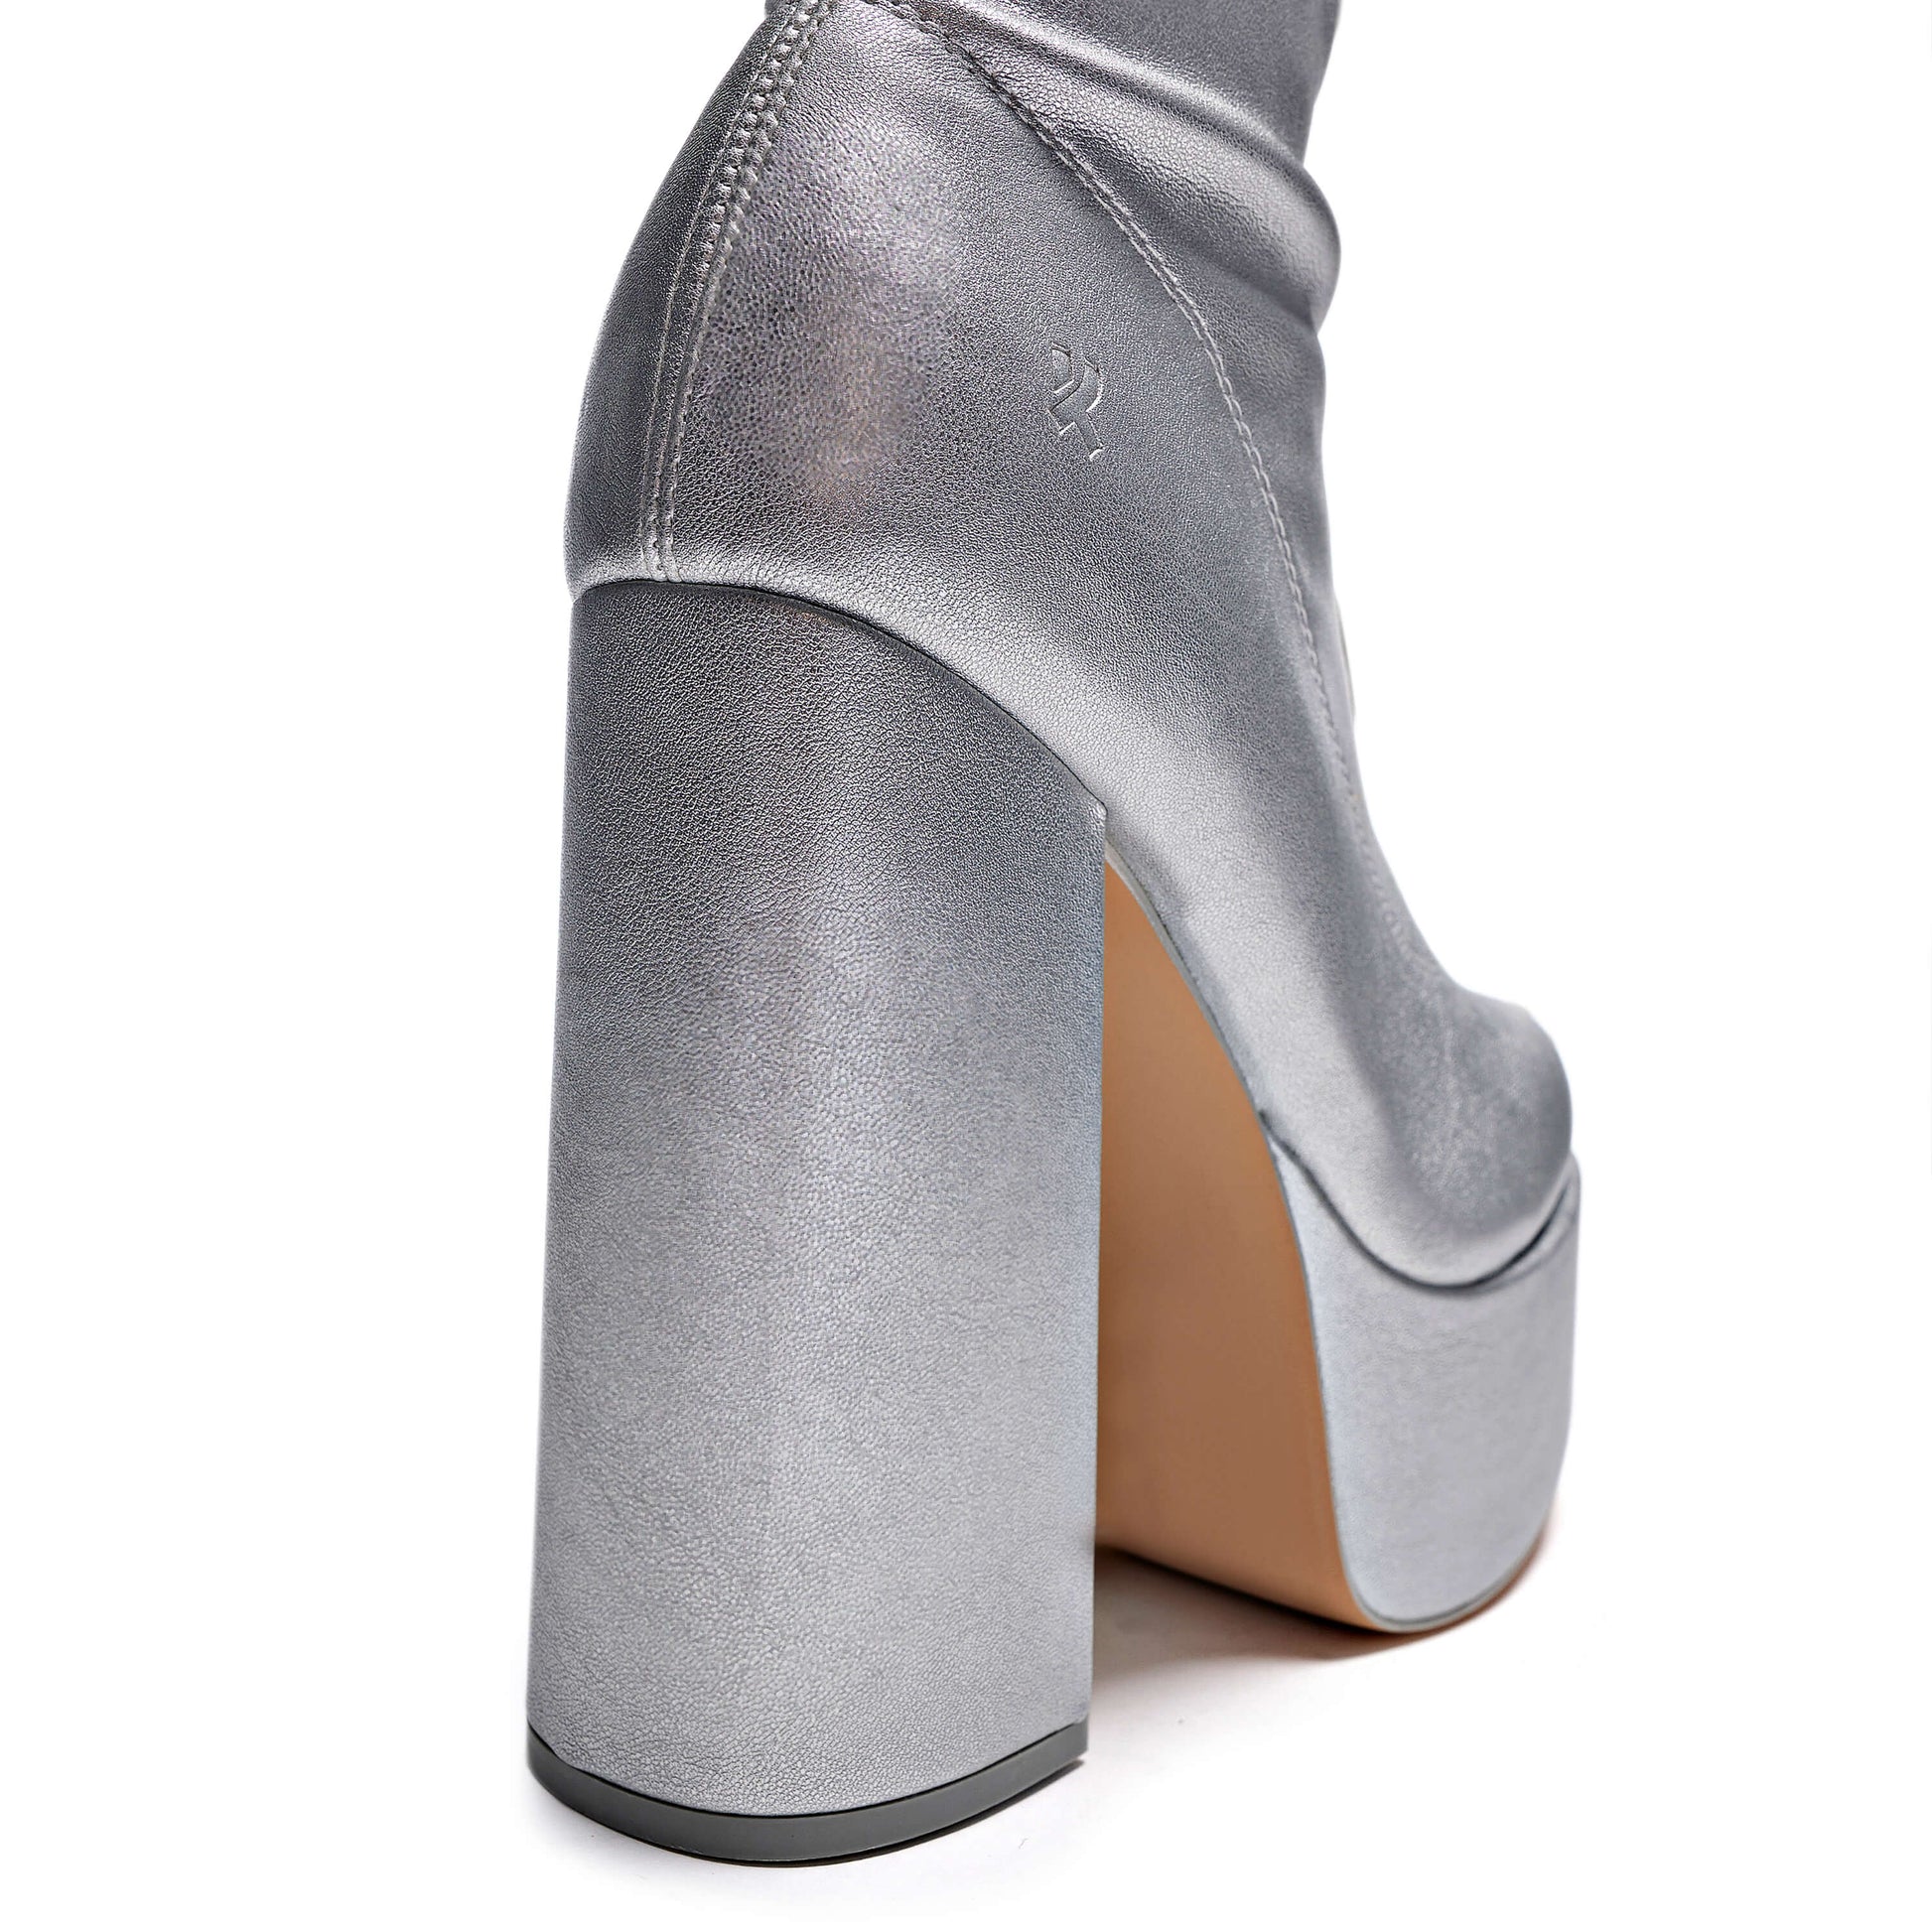 The Redemption Stretch Thigh High Boots - Silver - Long Boots - KOI Footwear - Silver - Back Heel View